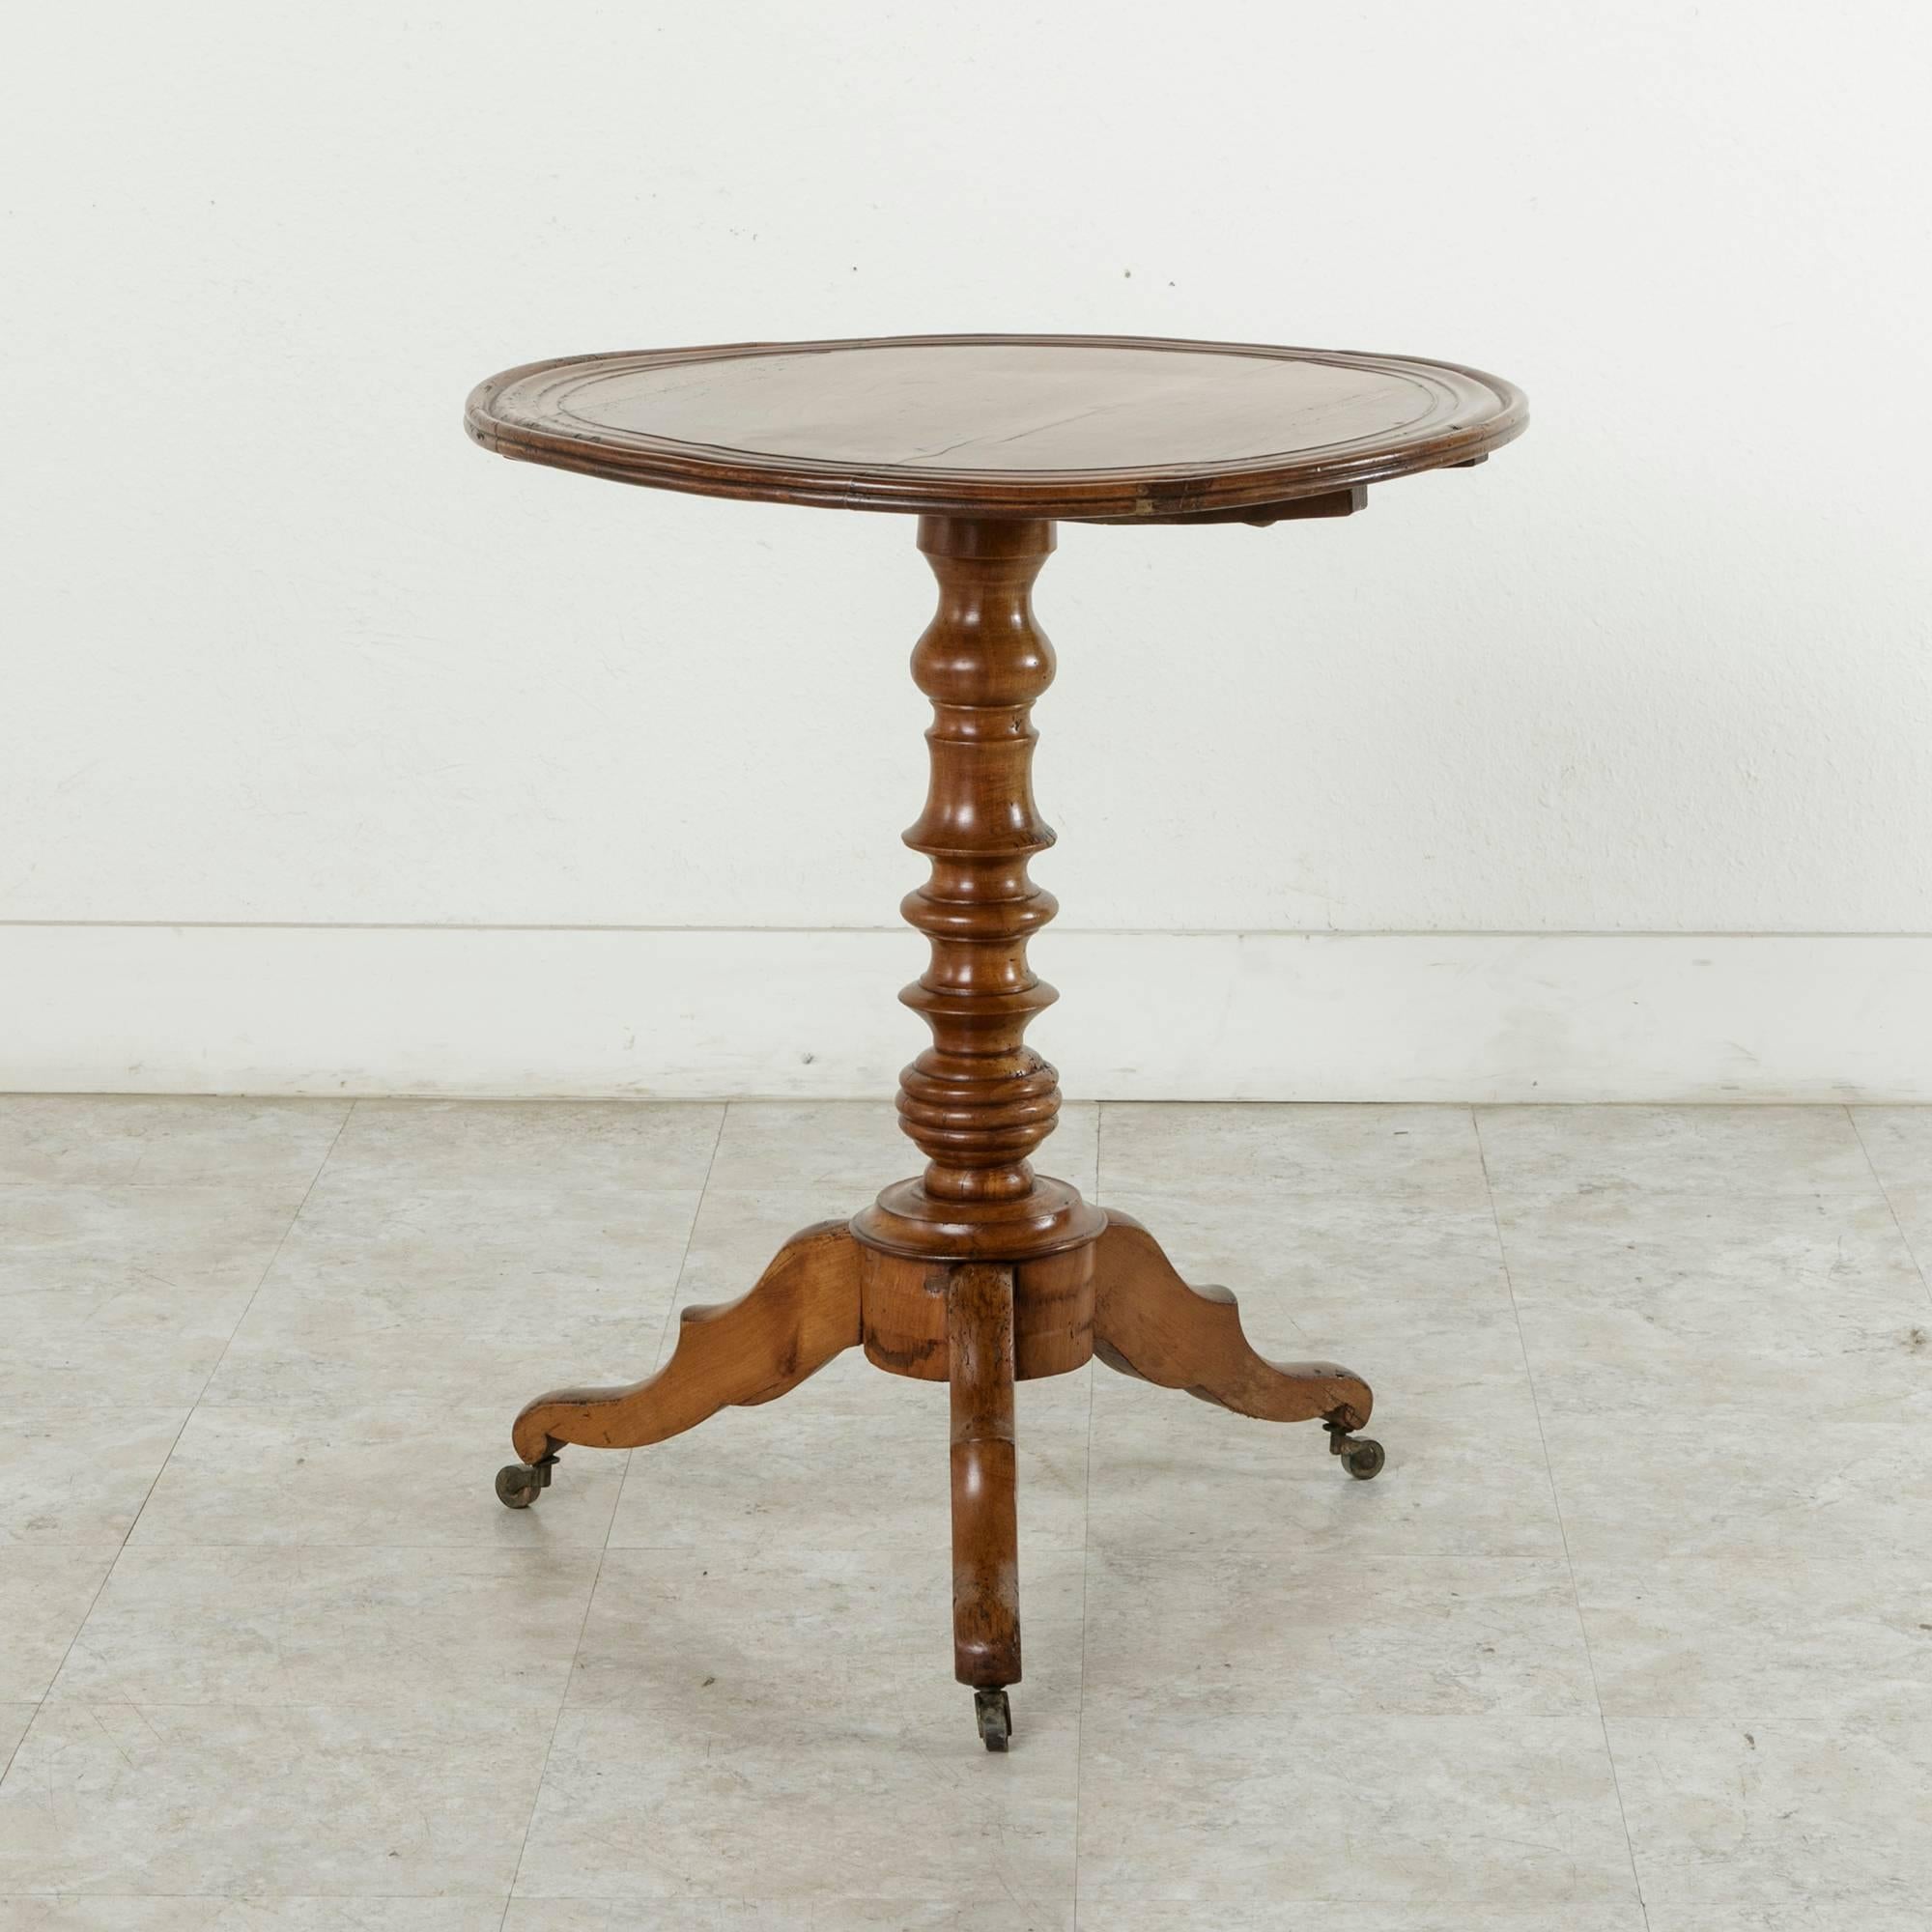 Constructed of cherrywood, this French Louis Philippe period pedestal side table features a double beveled tilt top that rests on a central turned pillar. The column is supported by a tripod base with casters on the feet. An ideal table to place